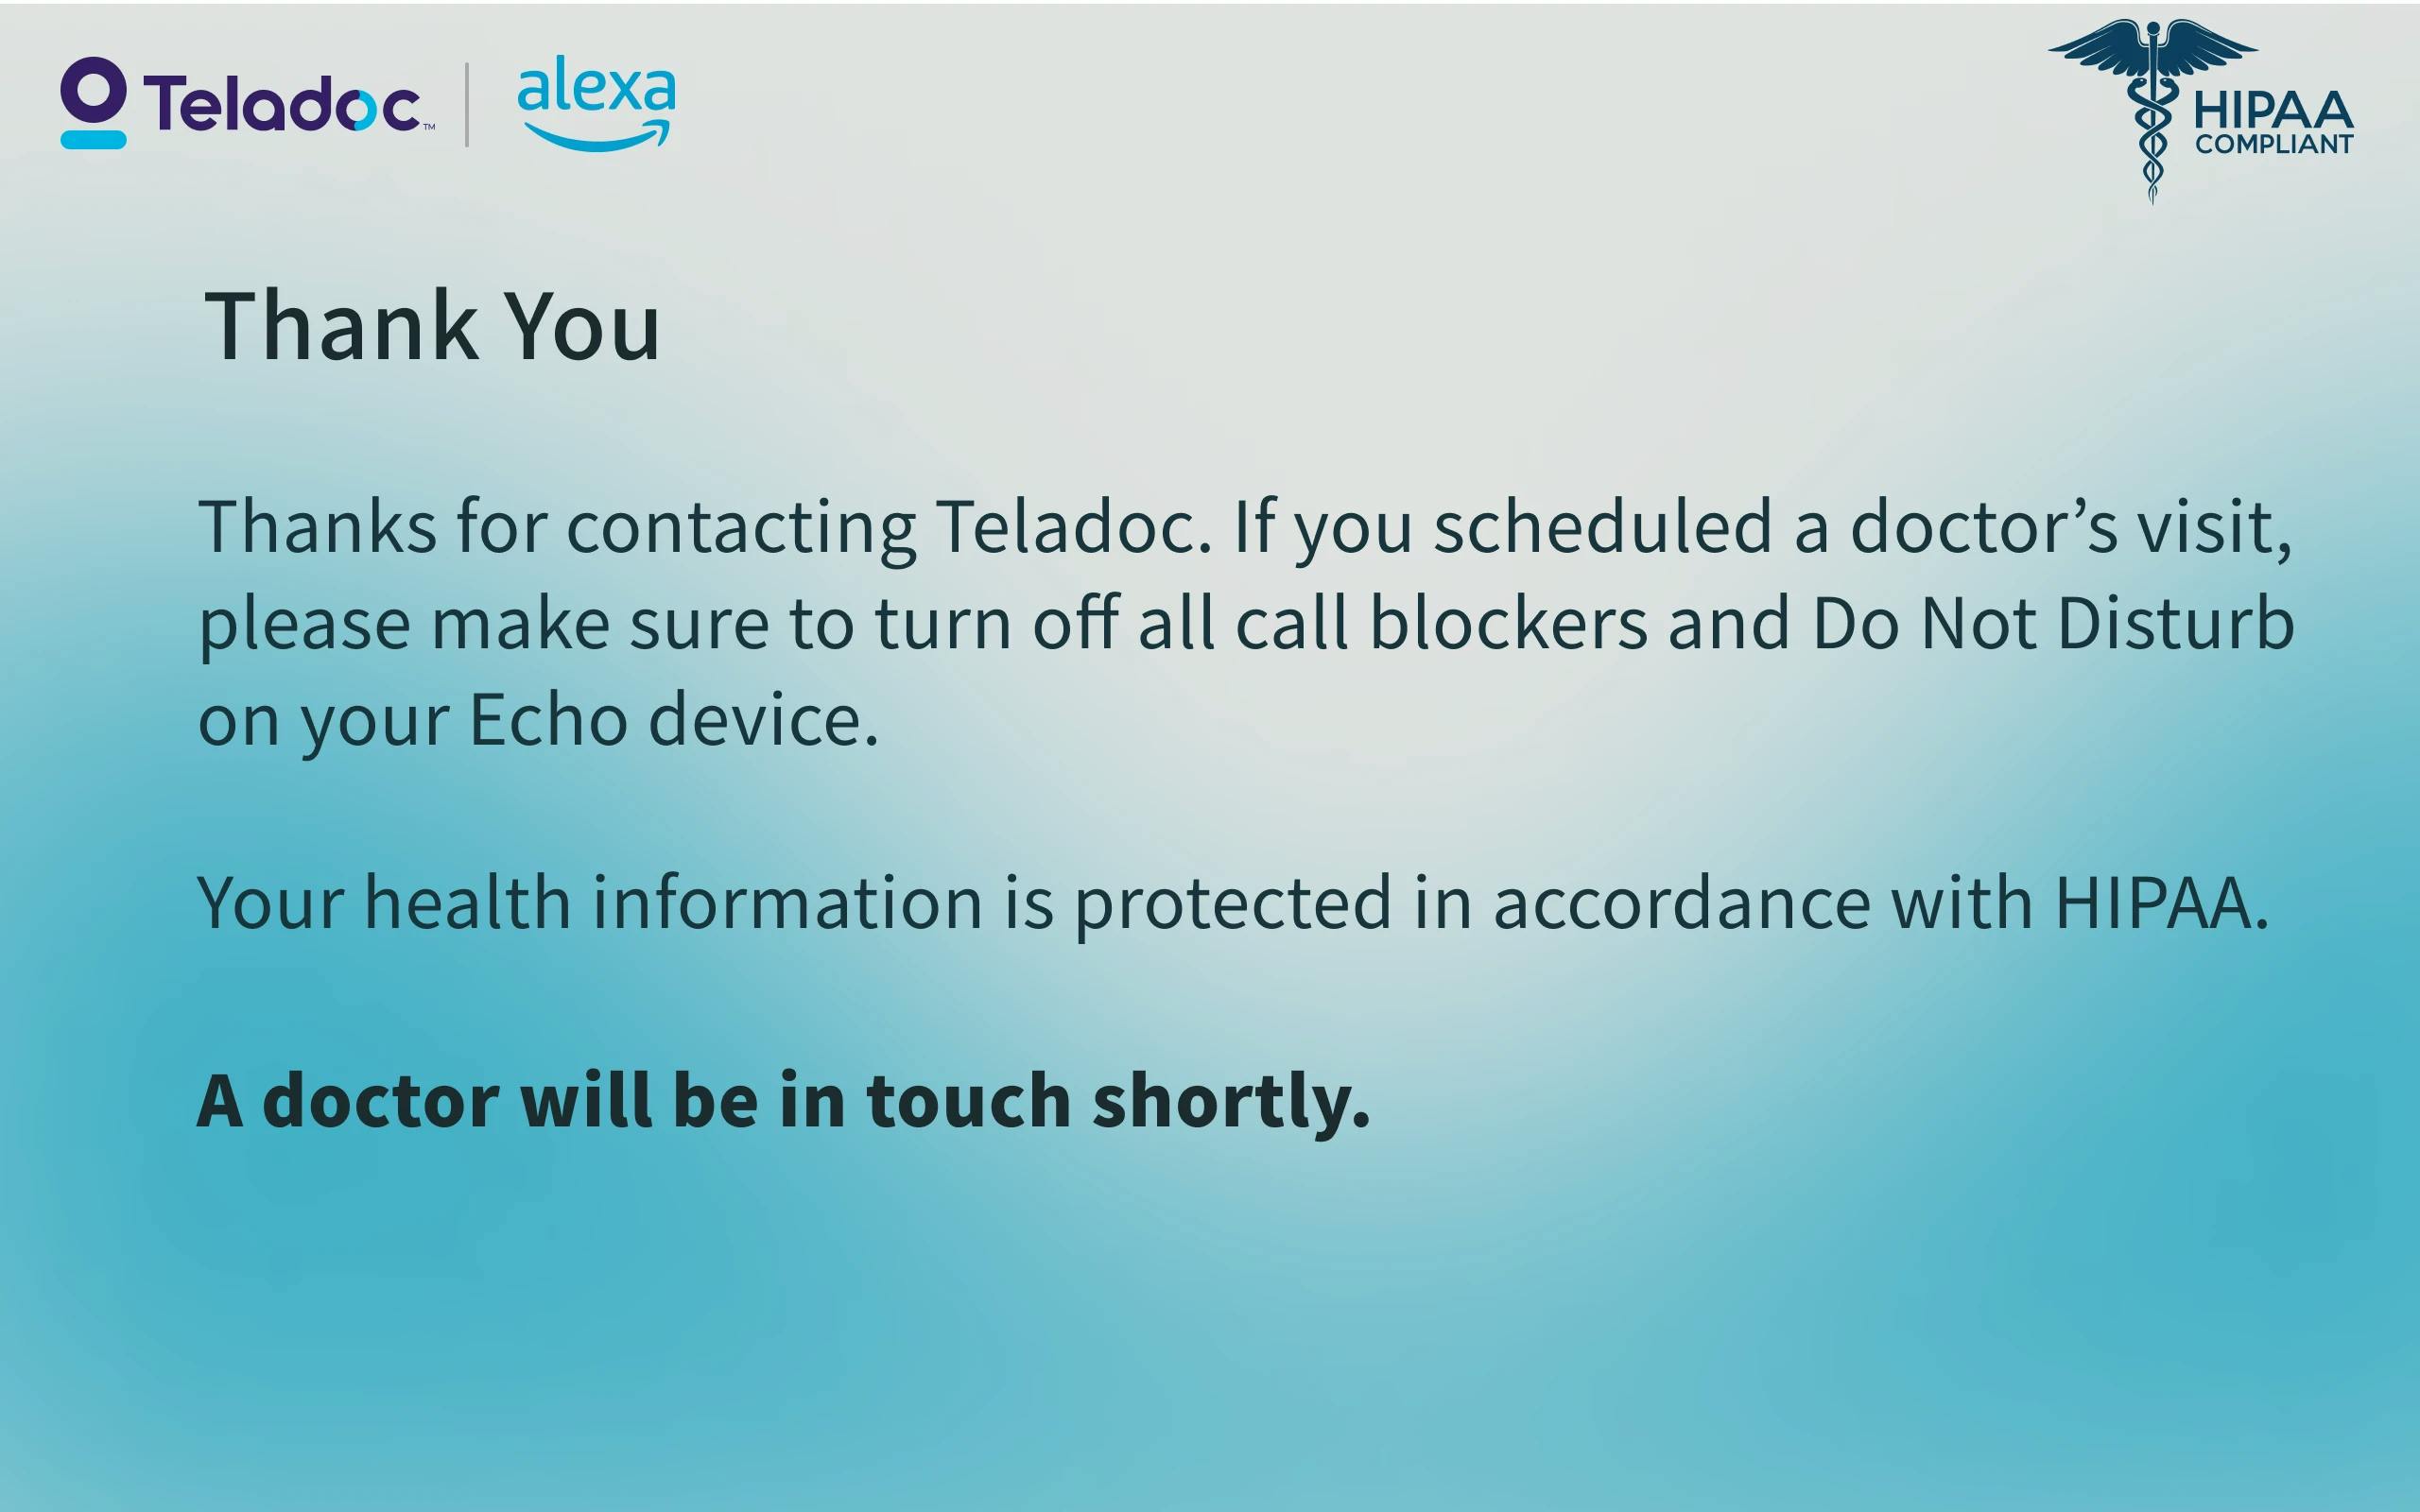 An Amazon Echo Show screen displaying information from Teledoc